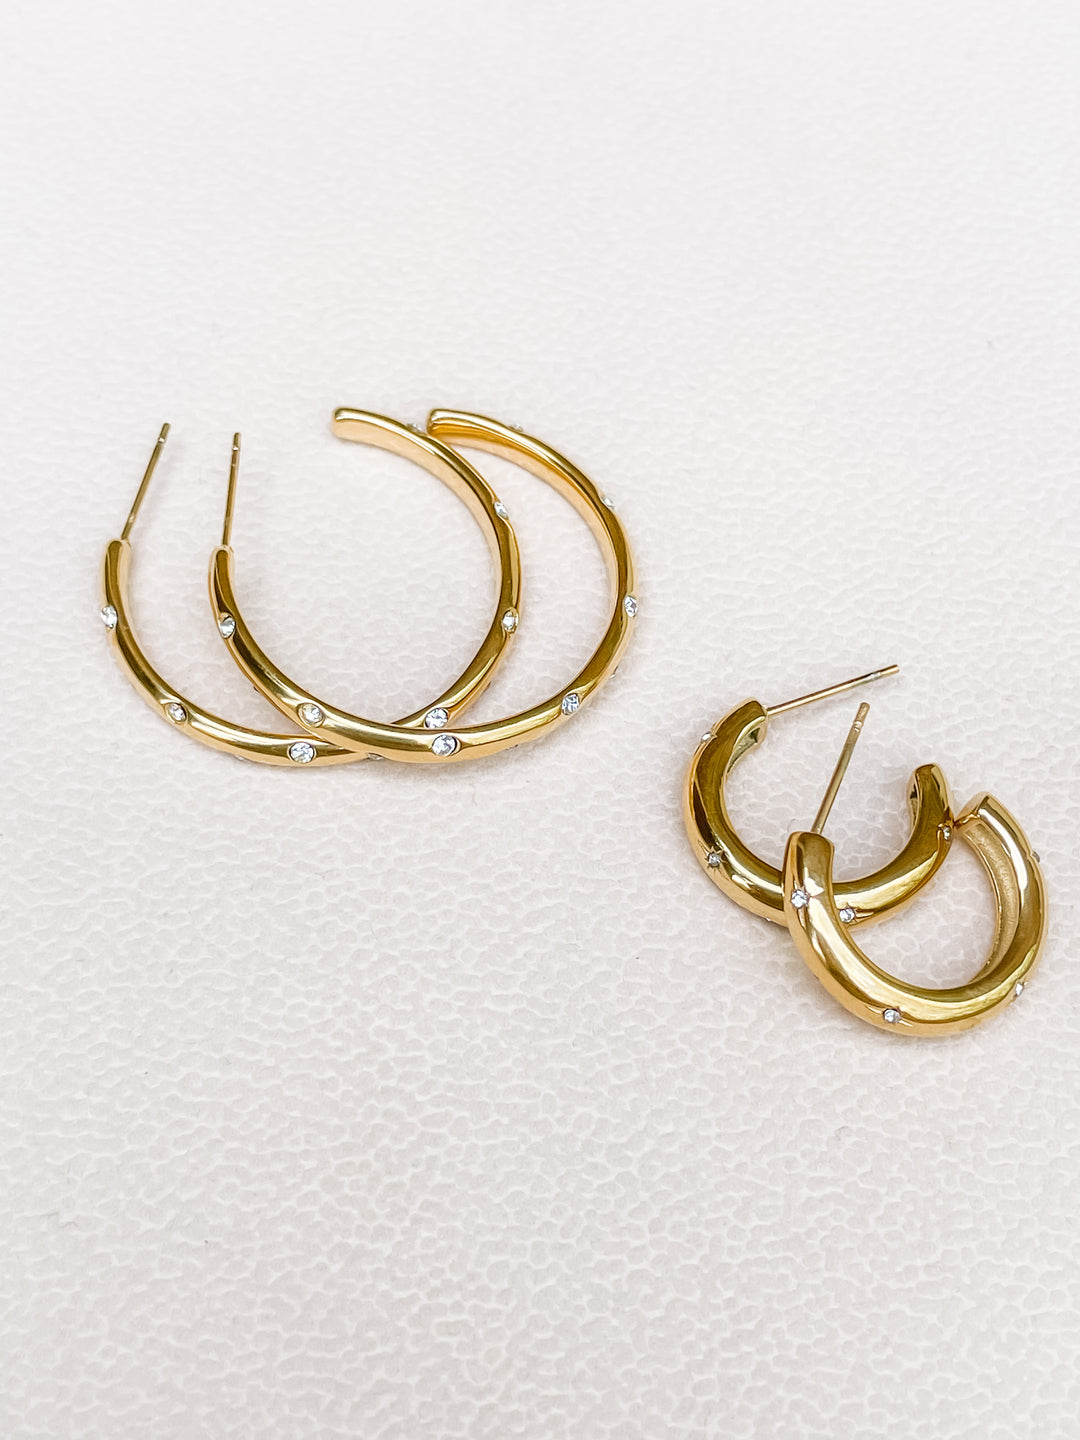 Be A Star C-Shape CZ Hoop Earrings in 18k Gold-Plated Stainless Steel